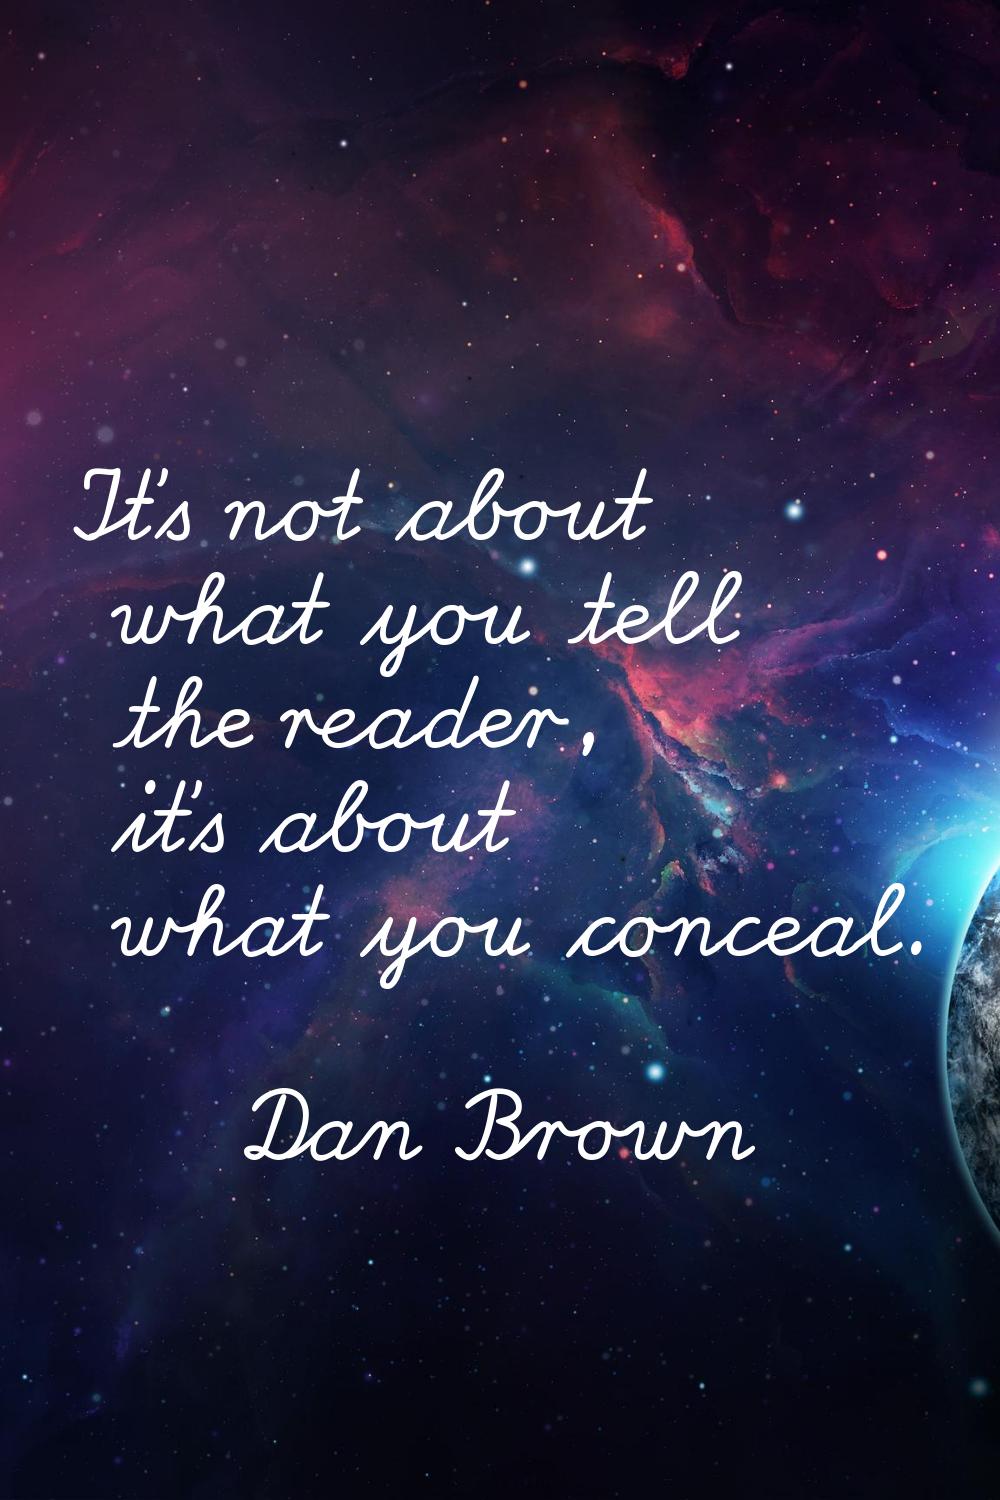 It's not about what you tell the reader, it's about what you conceal.